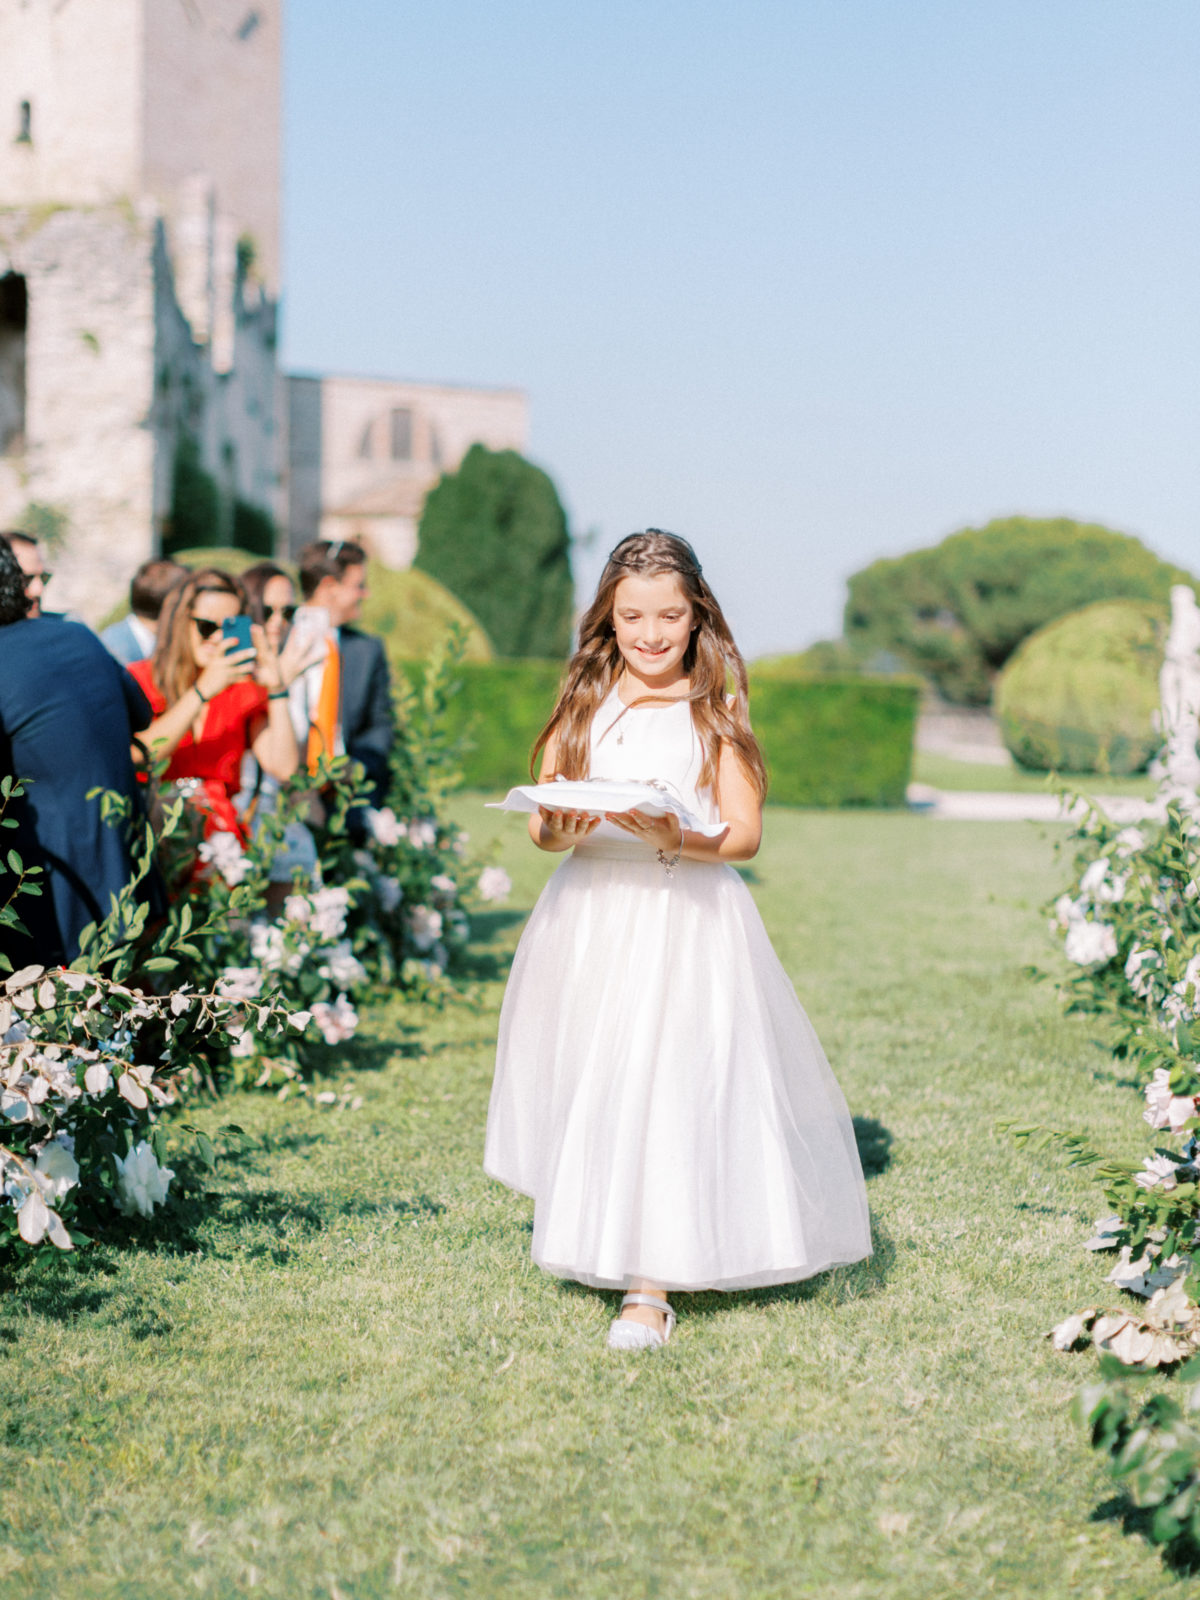 Tuscany wedding in a castle